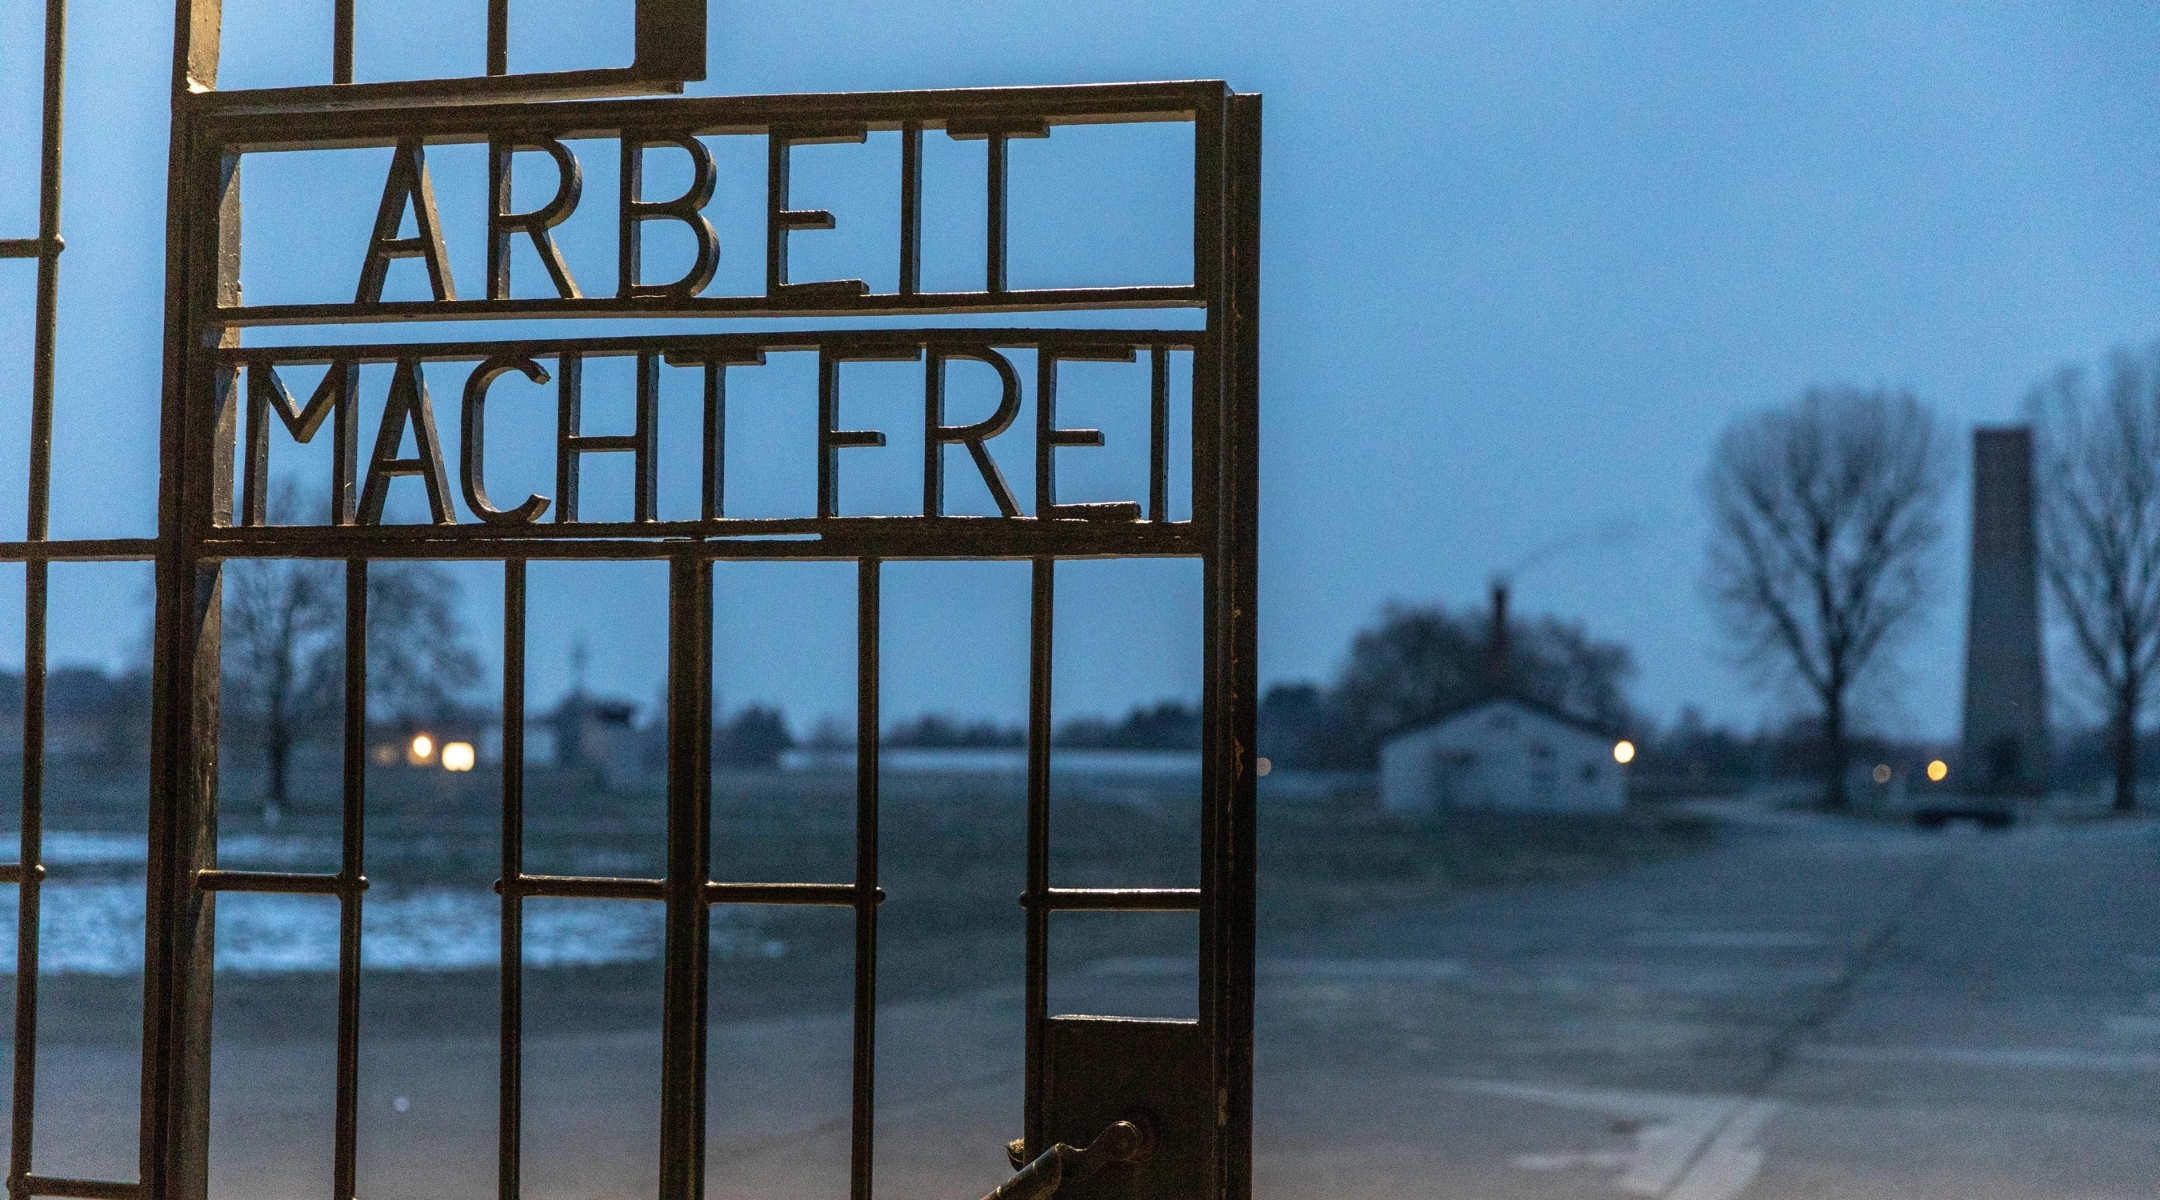 A gate with the inscription “Work Sets You Free” at the Sachsenhausen concentration camp memorial in Oranienburg, Germany, Jan. 25, 2019. (Omer Messinger/Getty Images)